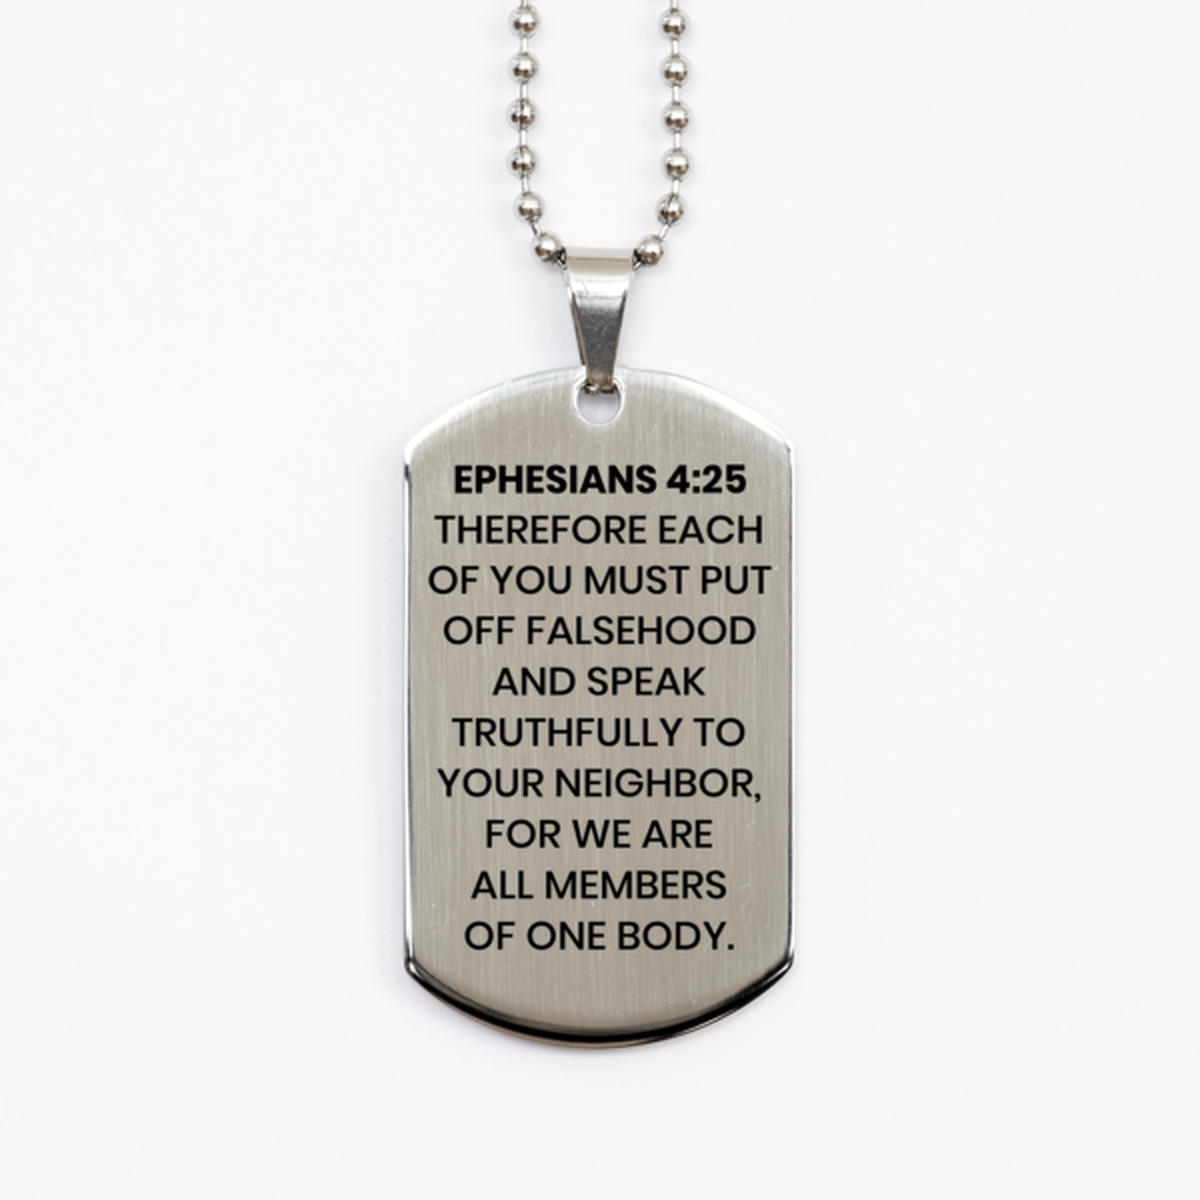 Ephesians 4:25 Necklace, Bible Verse Necklace, Christian Necklace, Christian Birthday Gift, Stainless Steel Dog Tag Necklace, Gift for Christian.